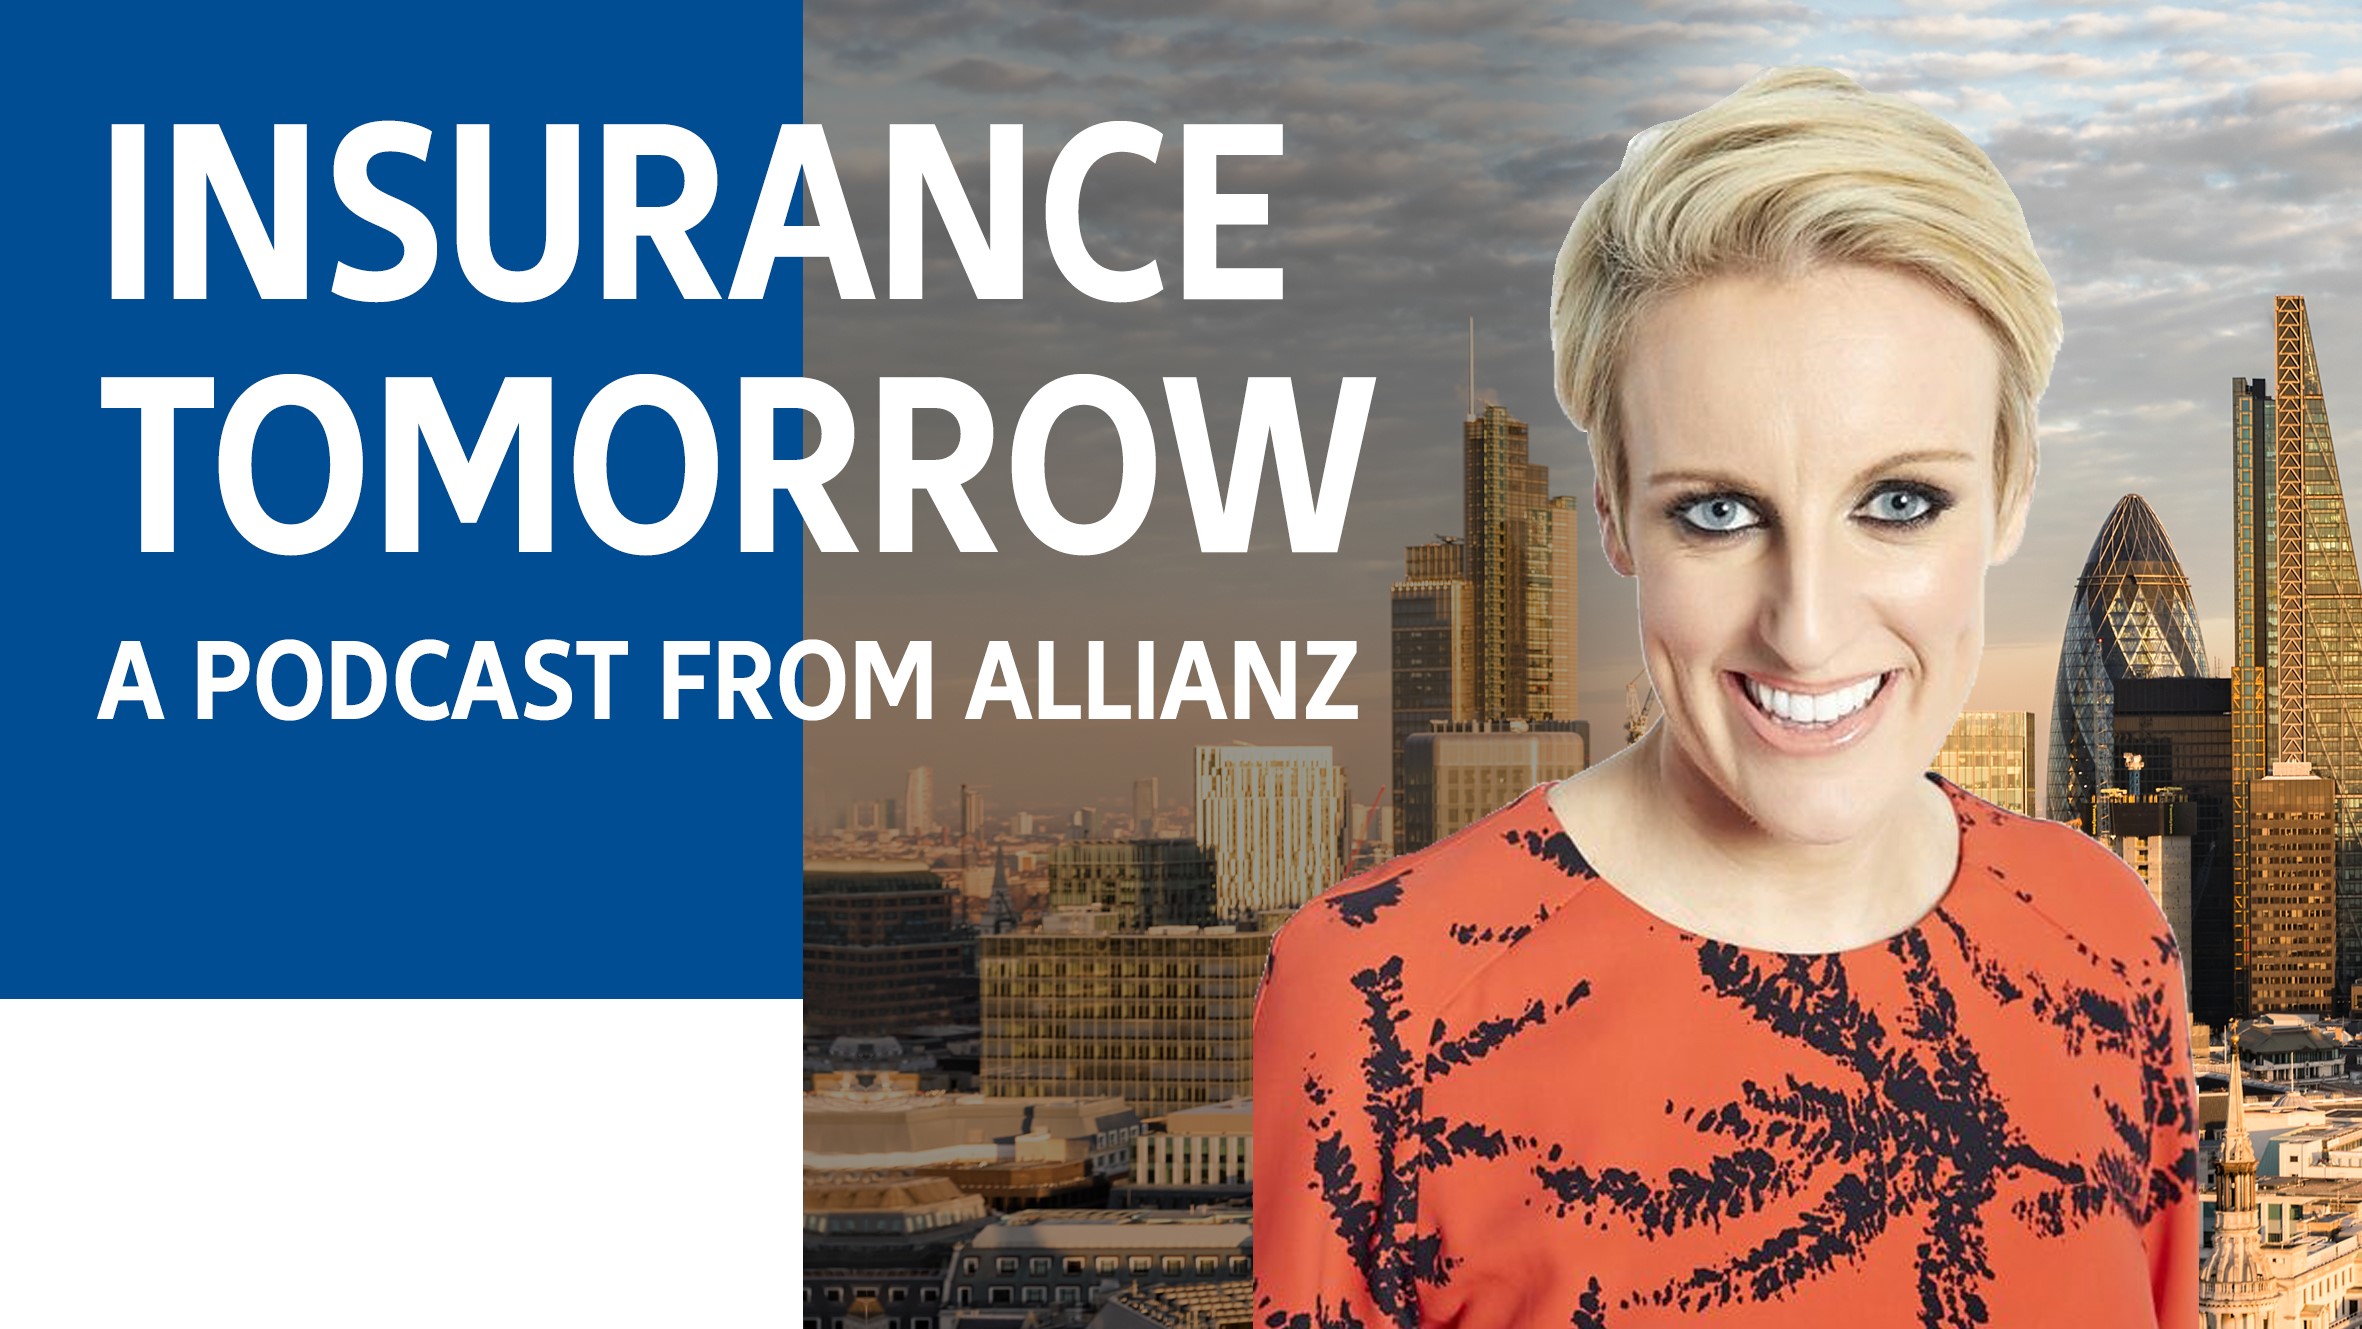 Insurance tomorrow with Steph McGovern